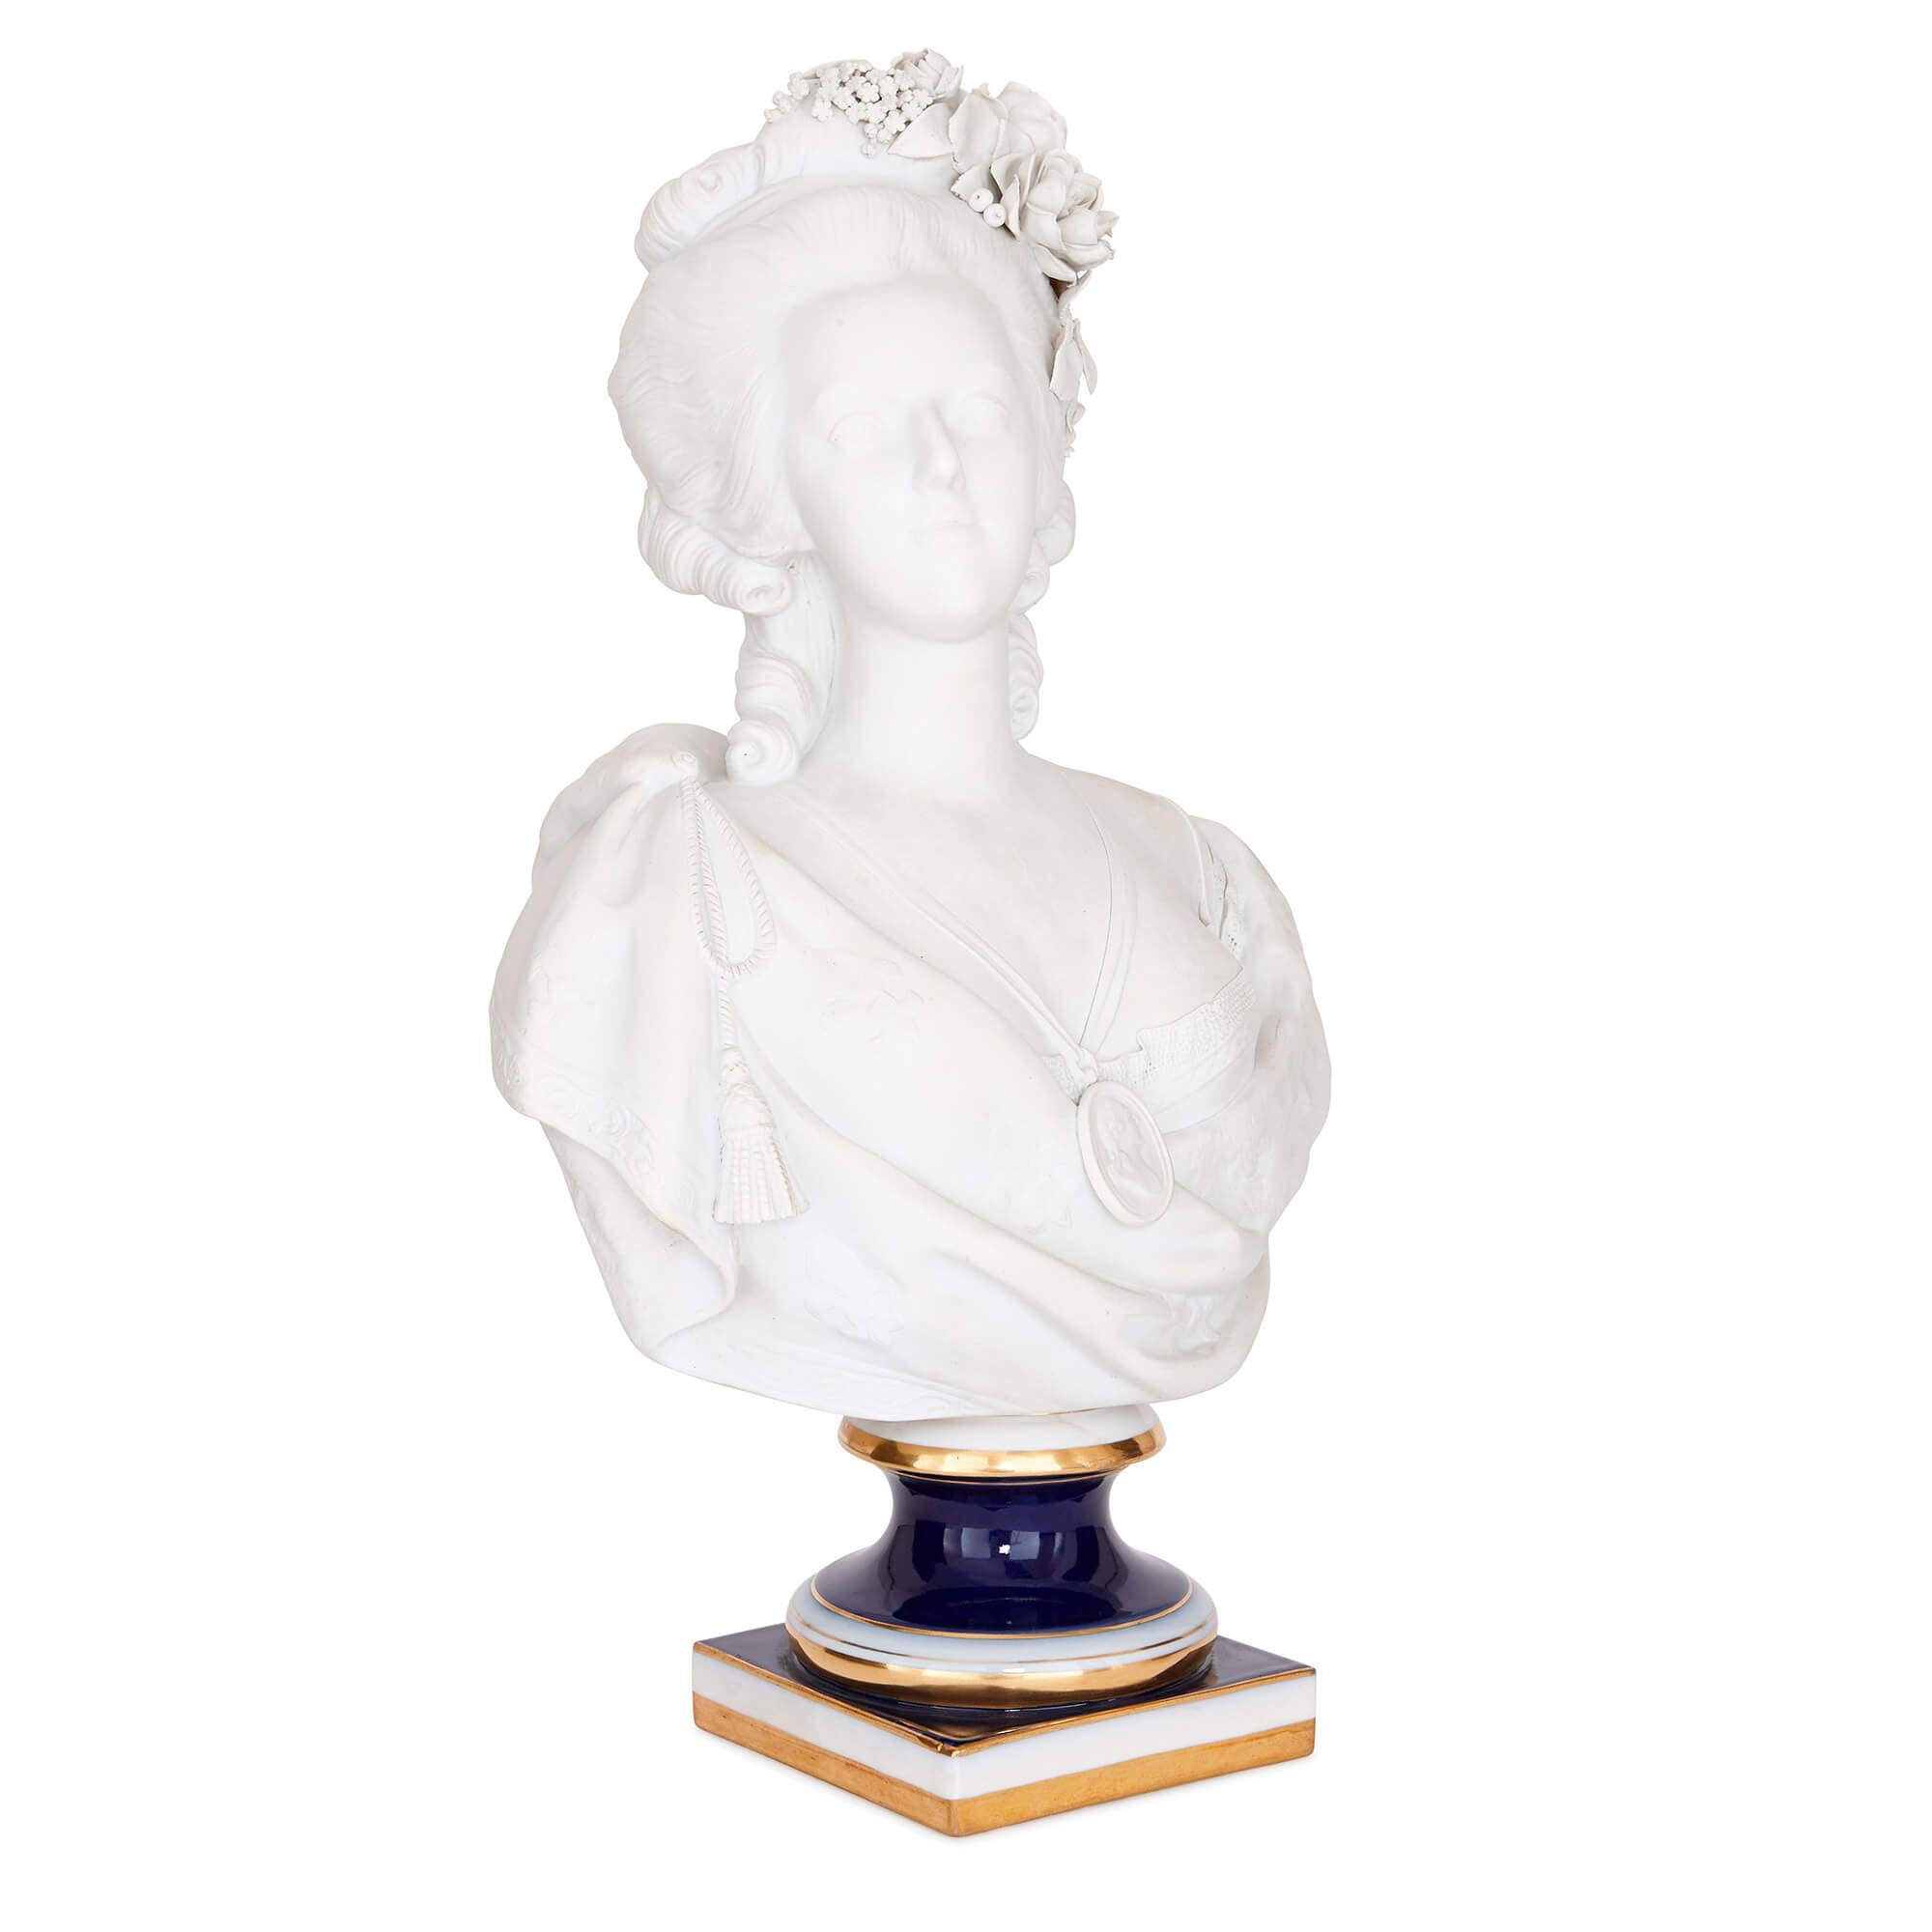 This antique bust of Marie Antoinette has been gracefully crafted in biscuit porcelain after the fashionable Sevres style. Biscuit, or bisque, describes the technique whereby the porcelain is left unglazed, in its pure white state. This method